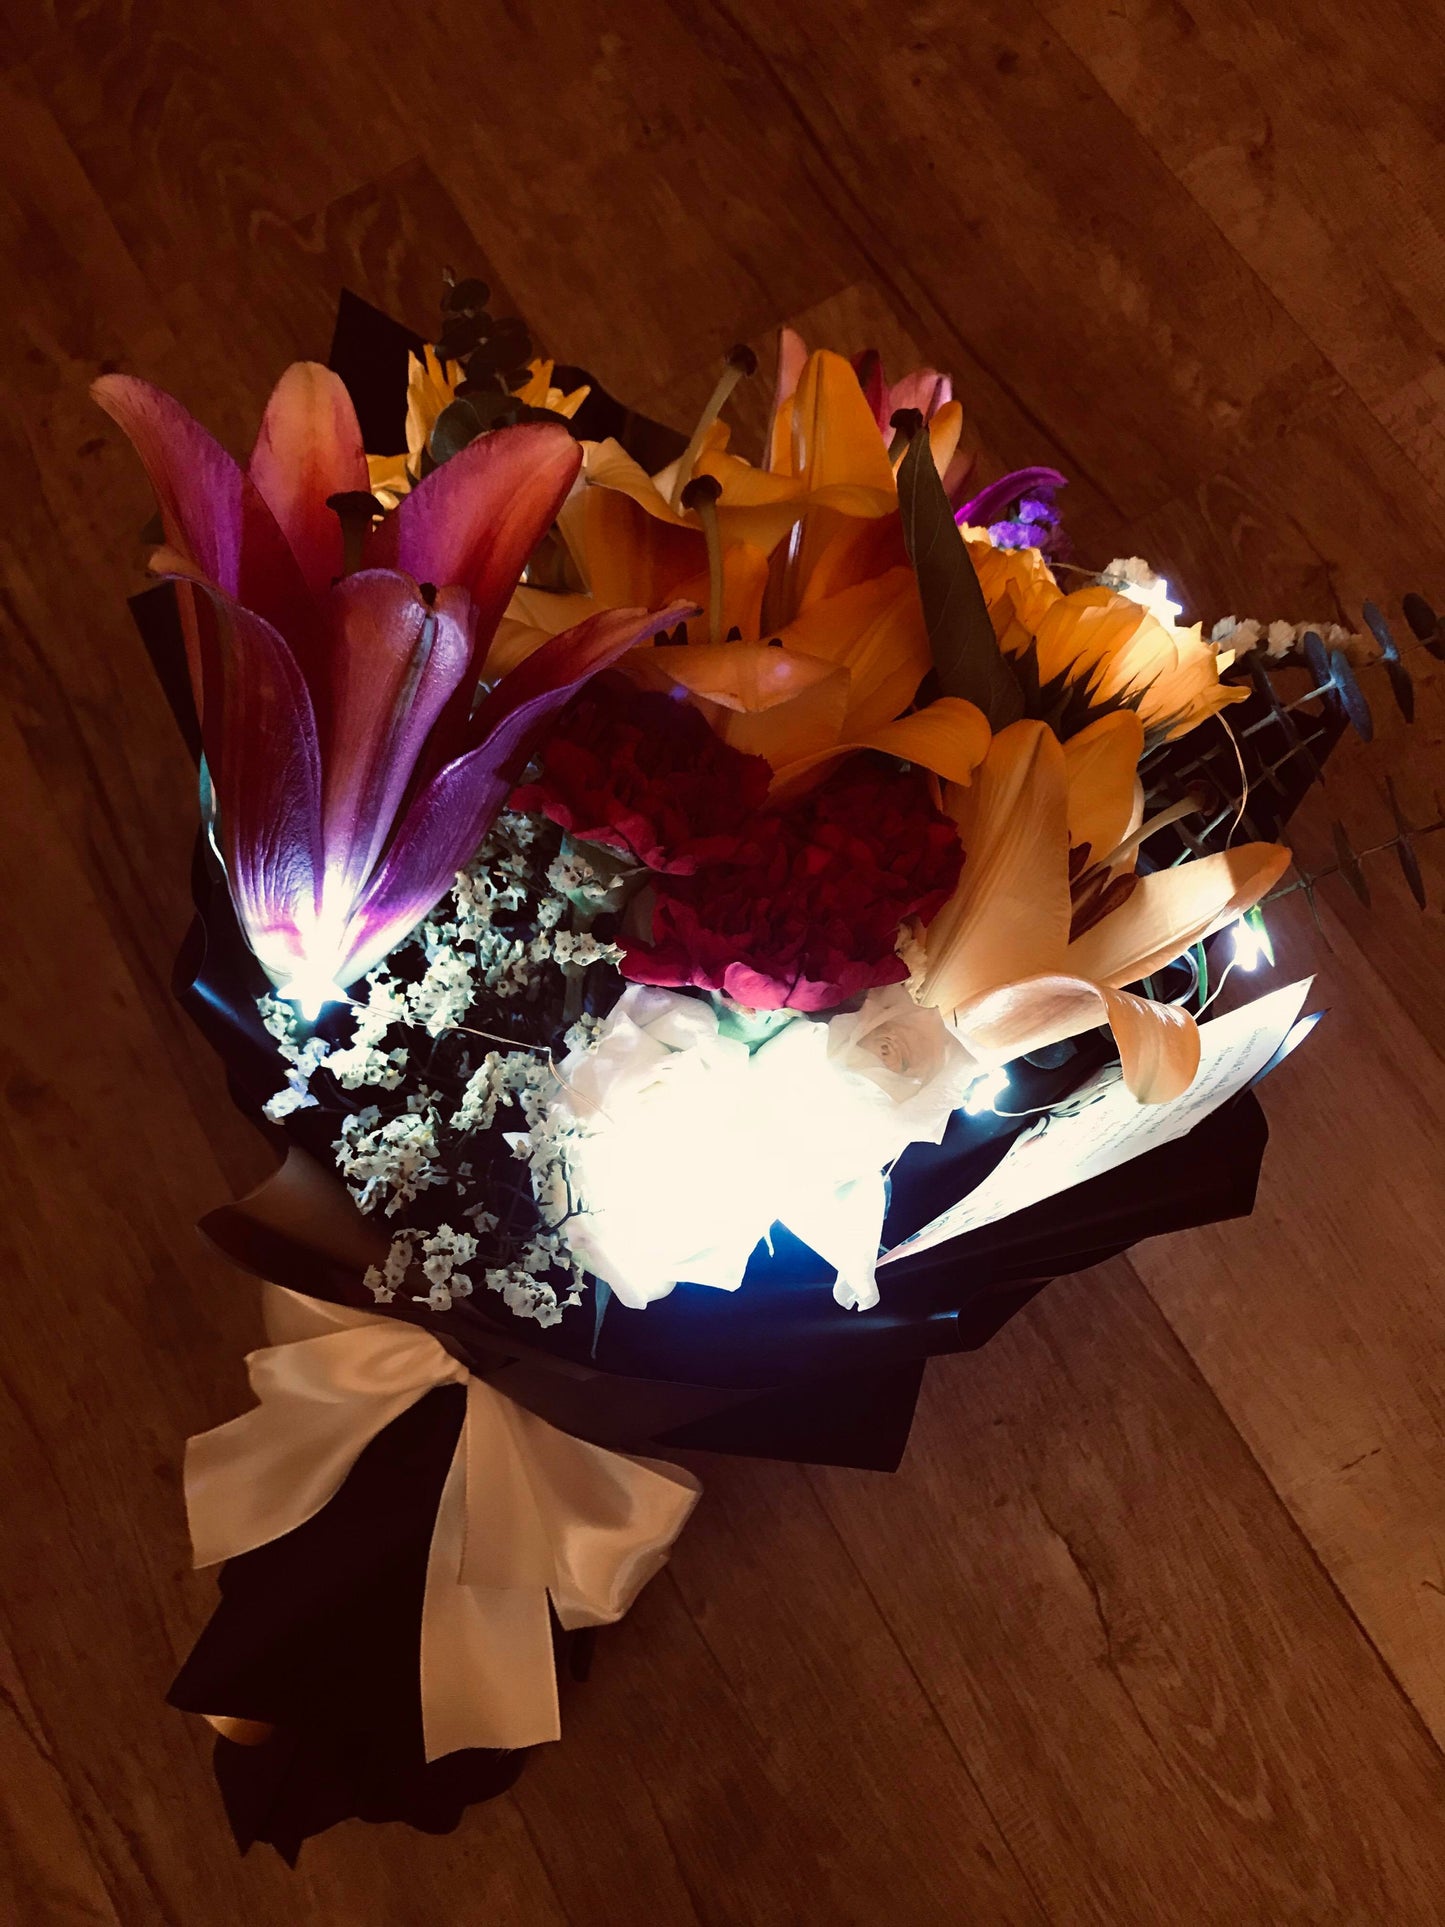 The Electrifying Birthday Bouquet